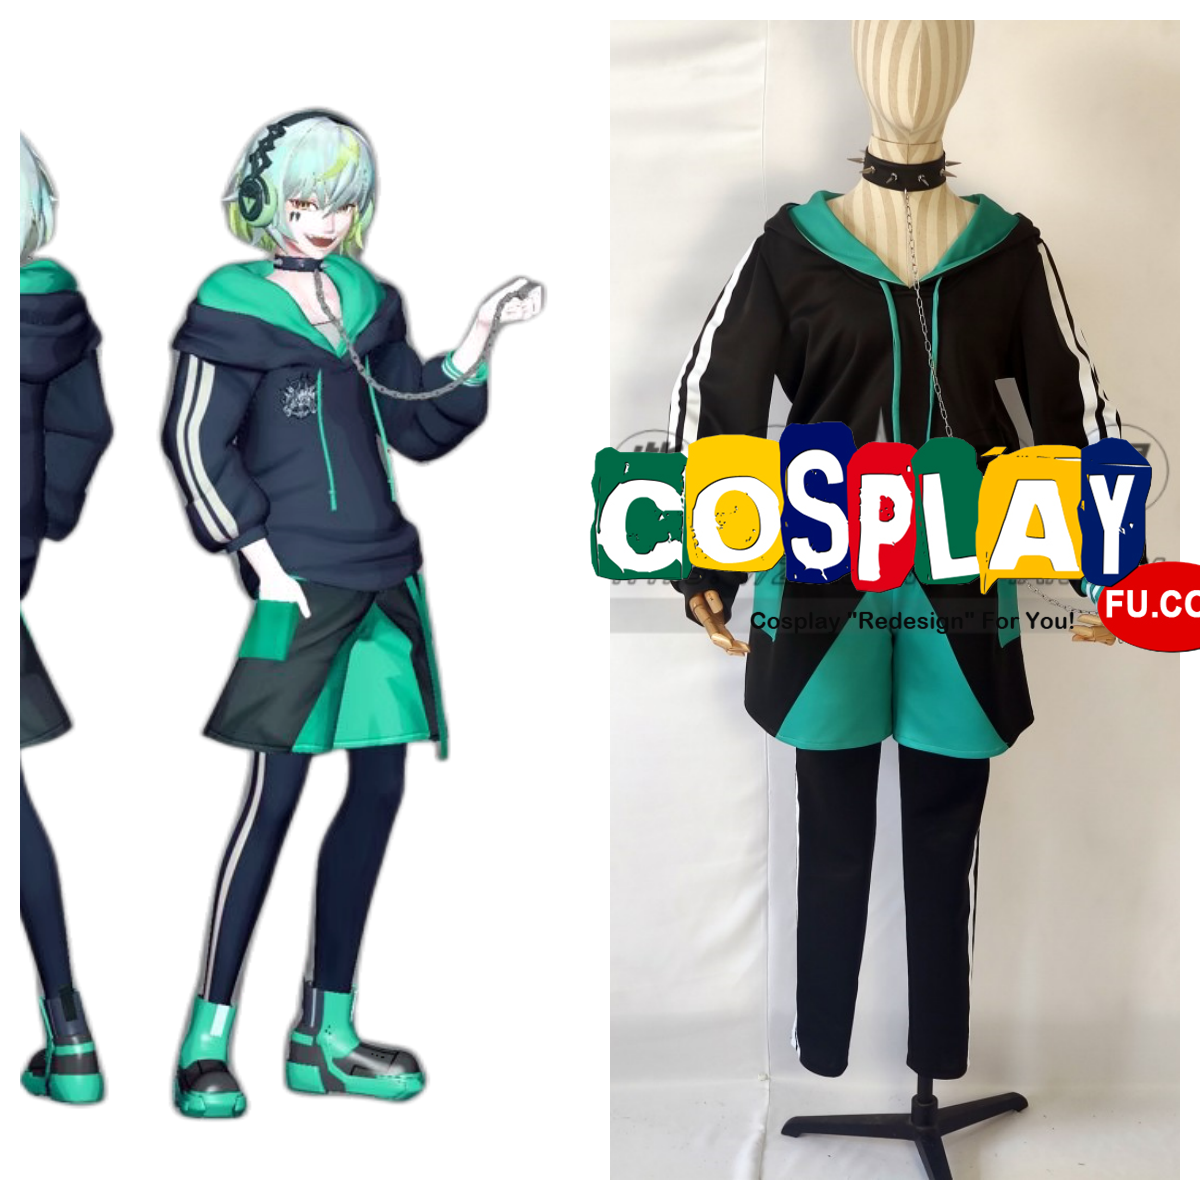 Kenta Cosplay Costume from Paradox Live